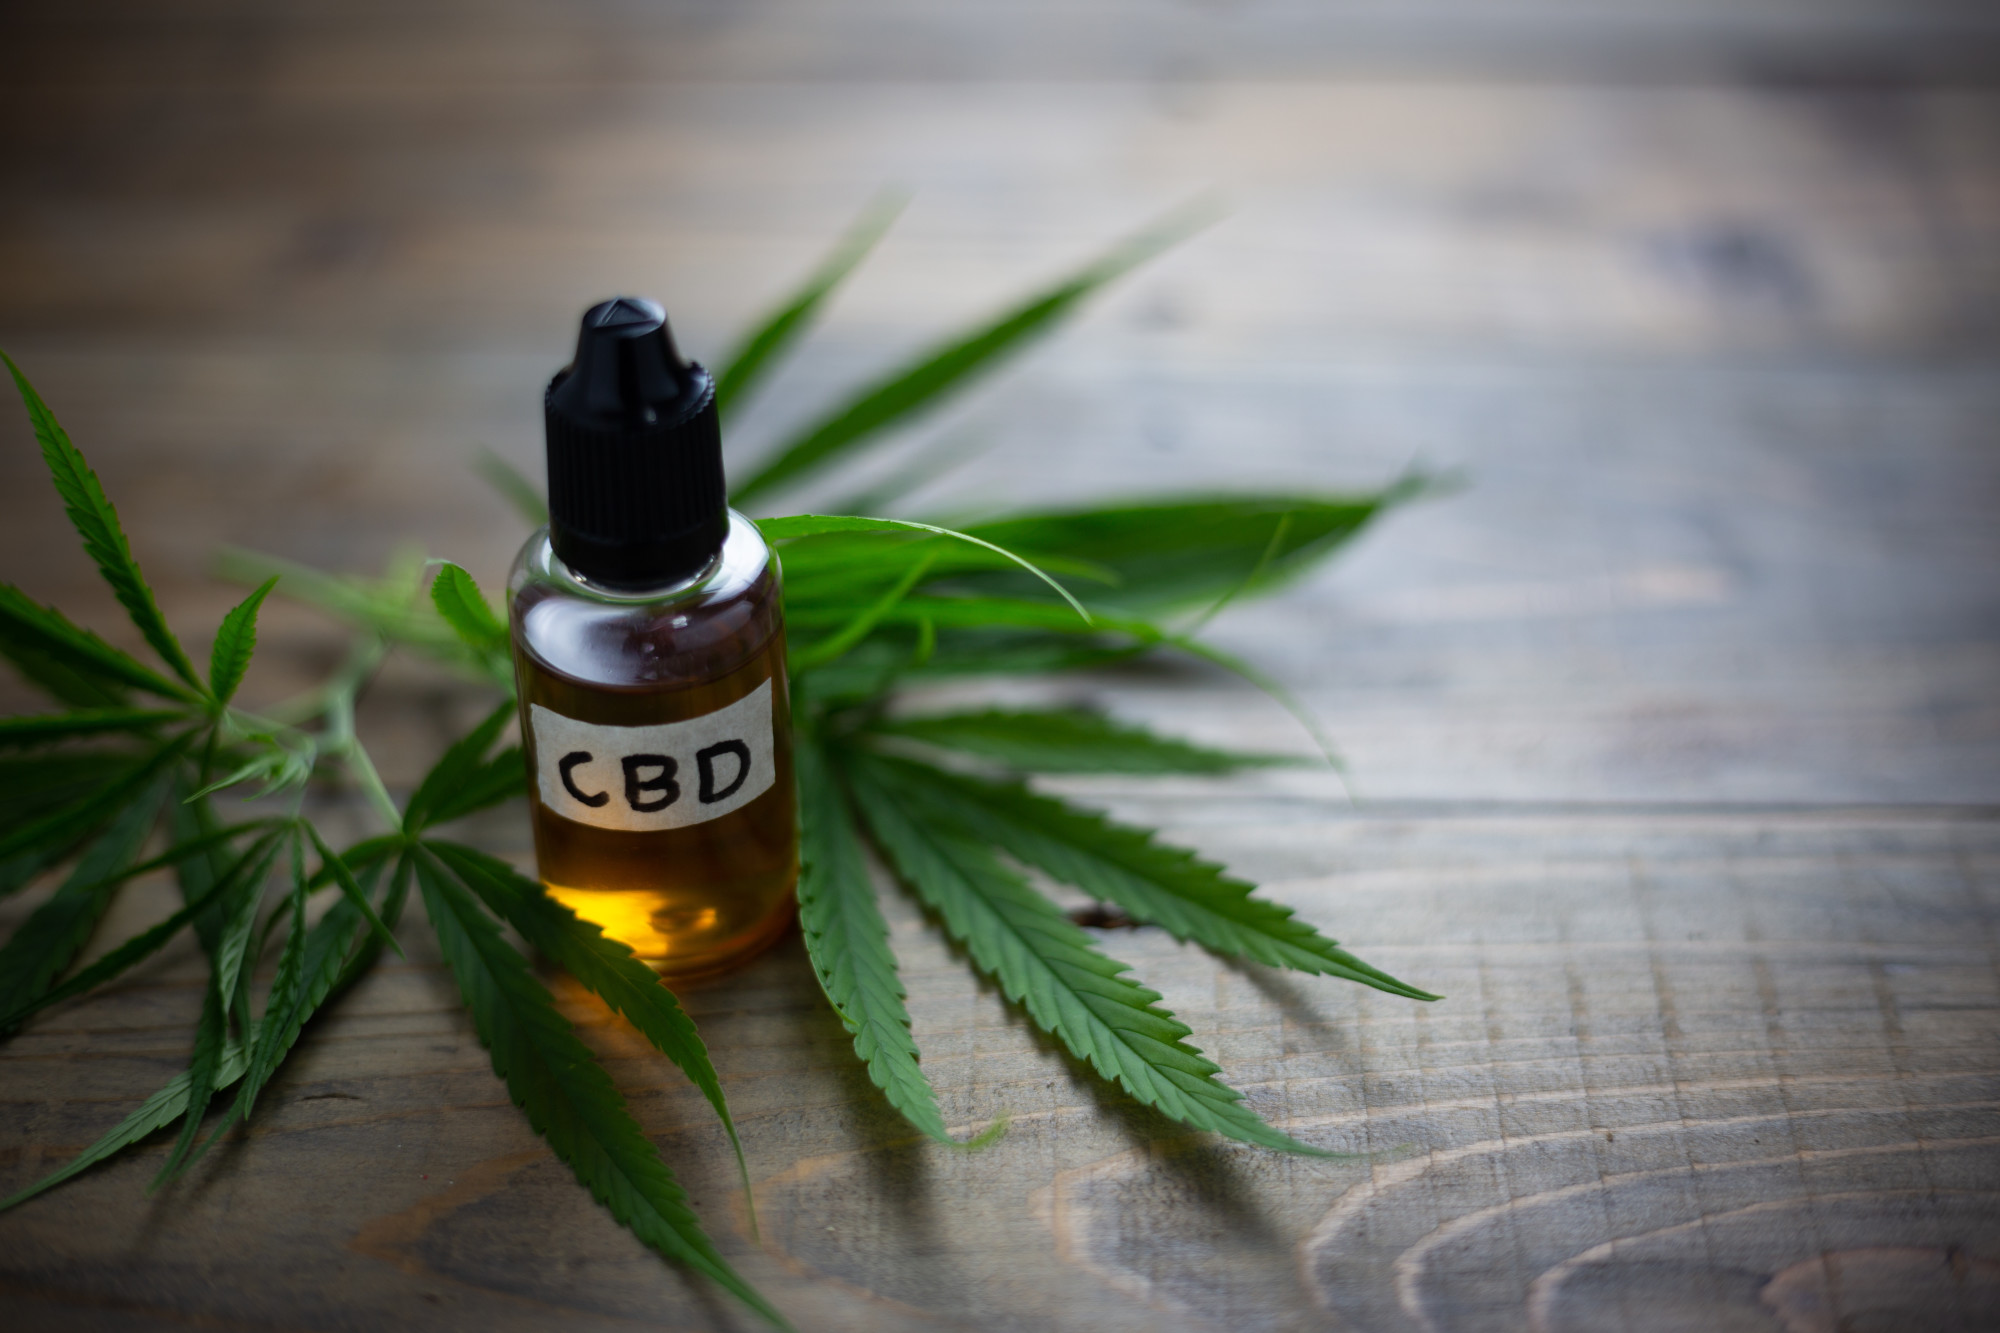 vial of CBD oil with cannabis leaves